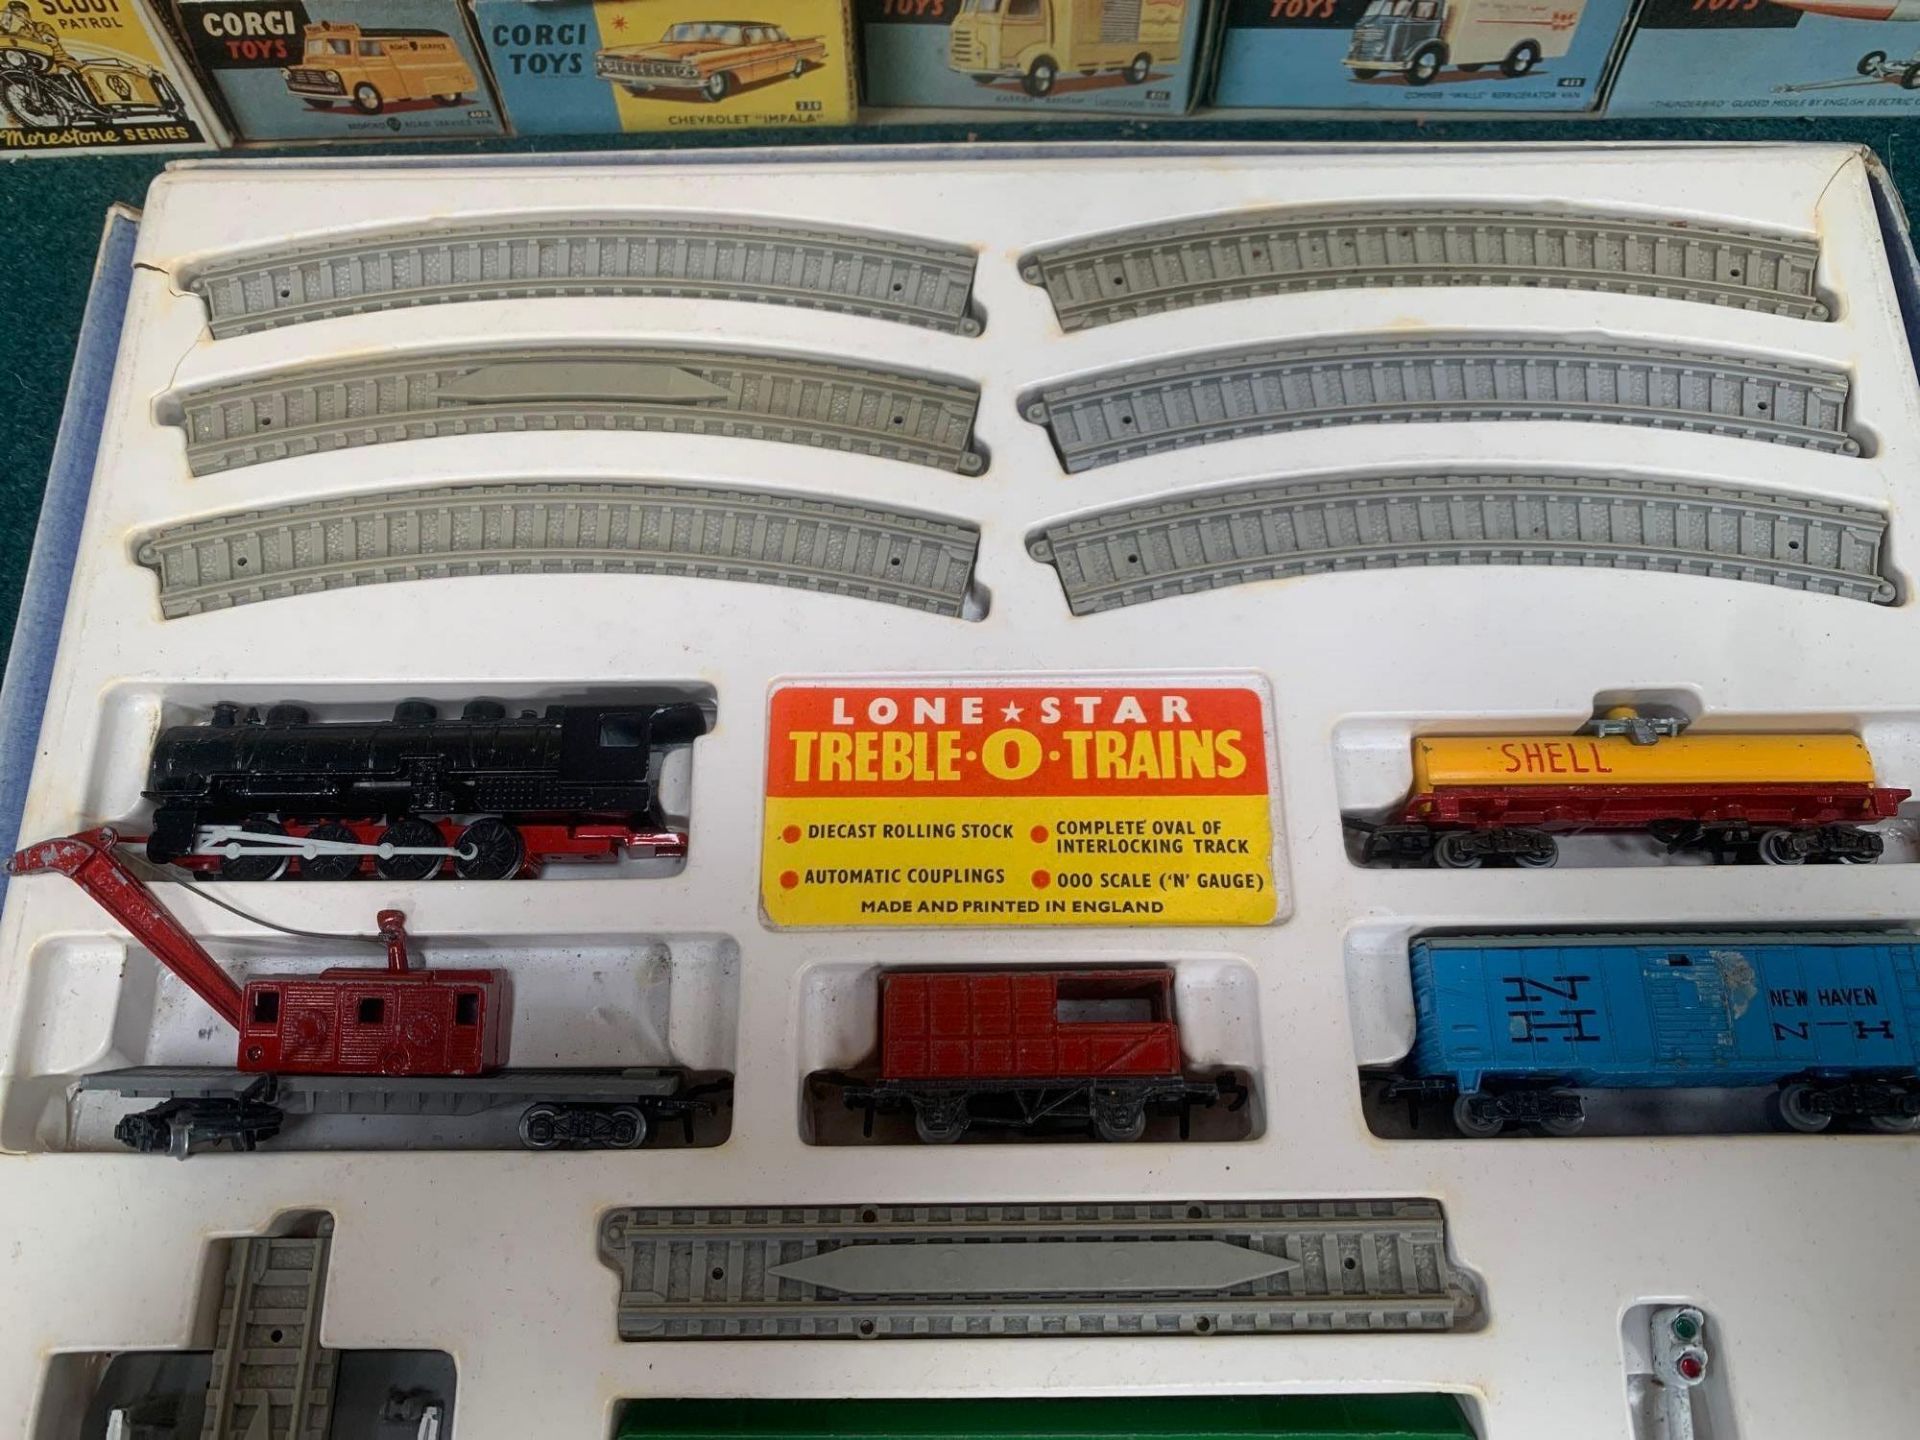 Lone Star Treble -O- Trains Box Has No Lid But Is Complete With Contents As Pictured Trains Track - Image 5 of 8